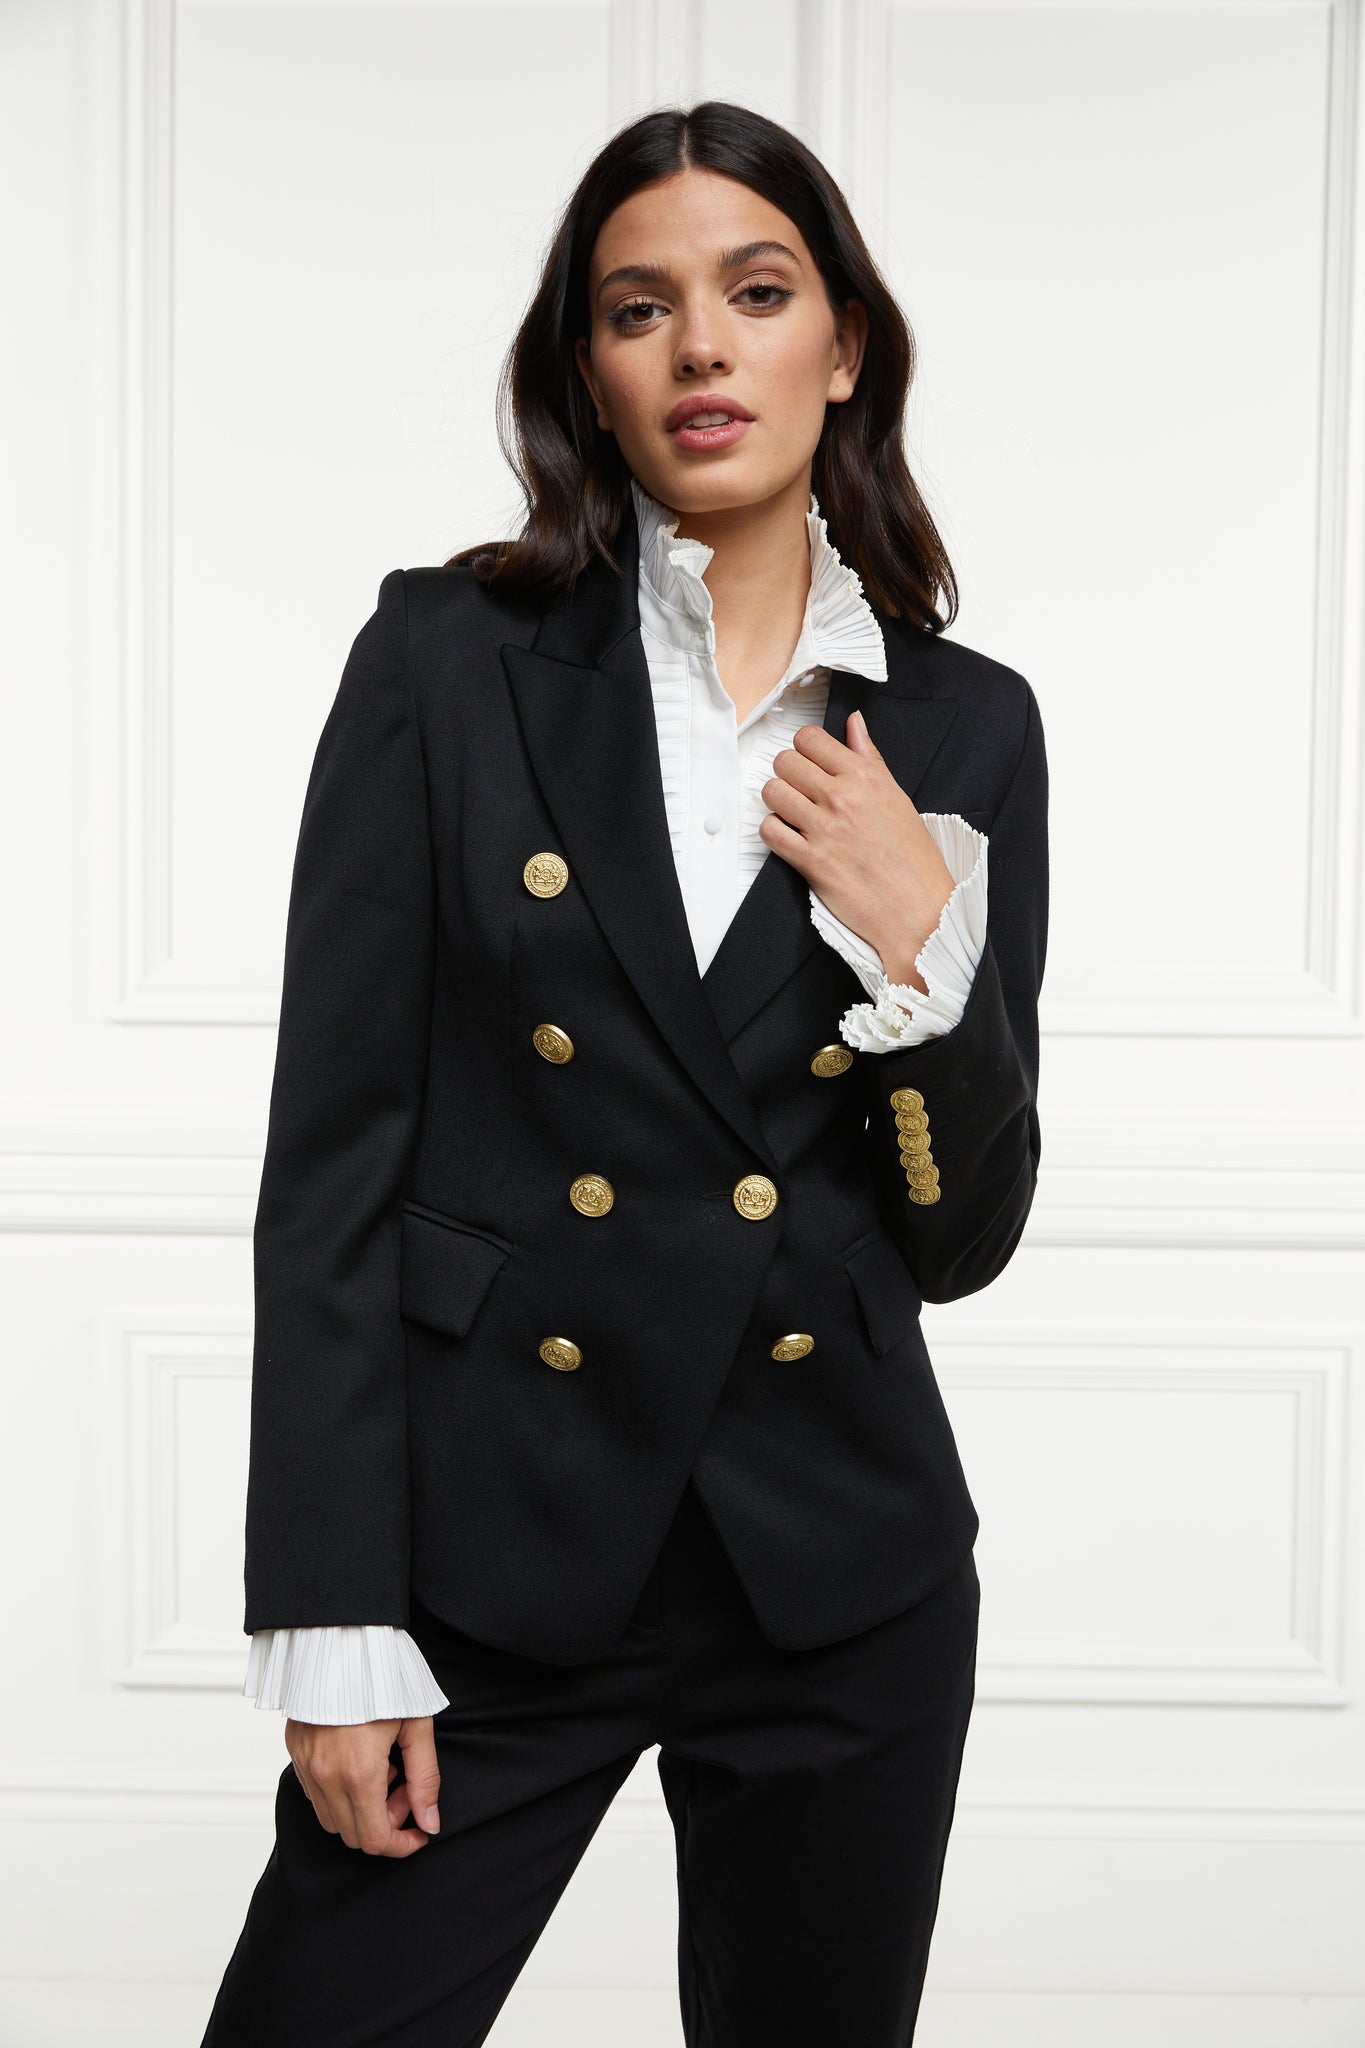 British made double breasted blazer that fastens with a single button hole to create a more form fitting silhouette with two pockets and gold button detailing this blazer is made from black barathea